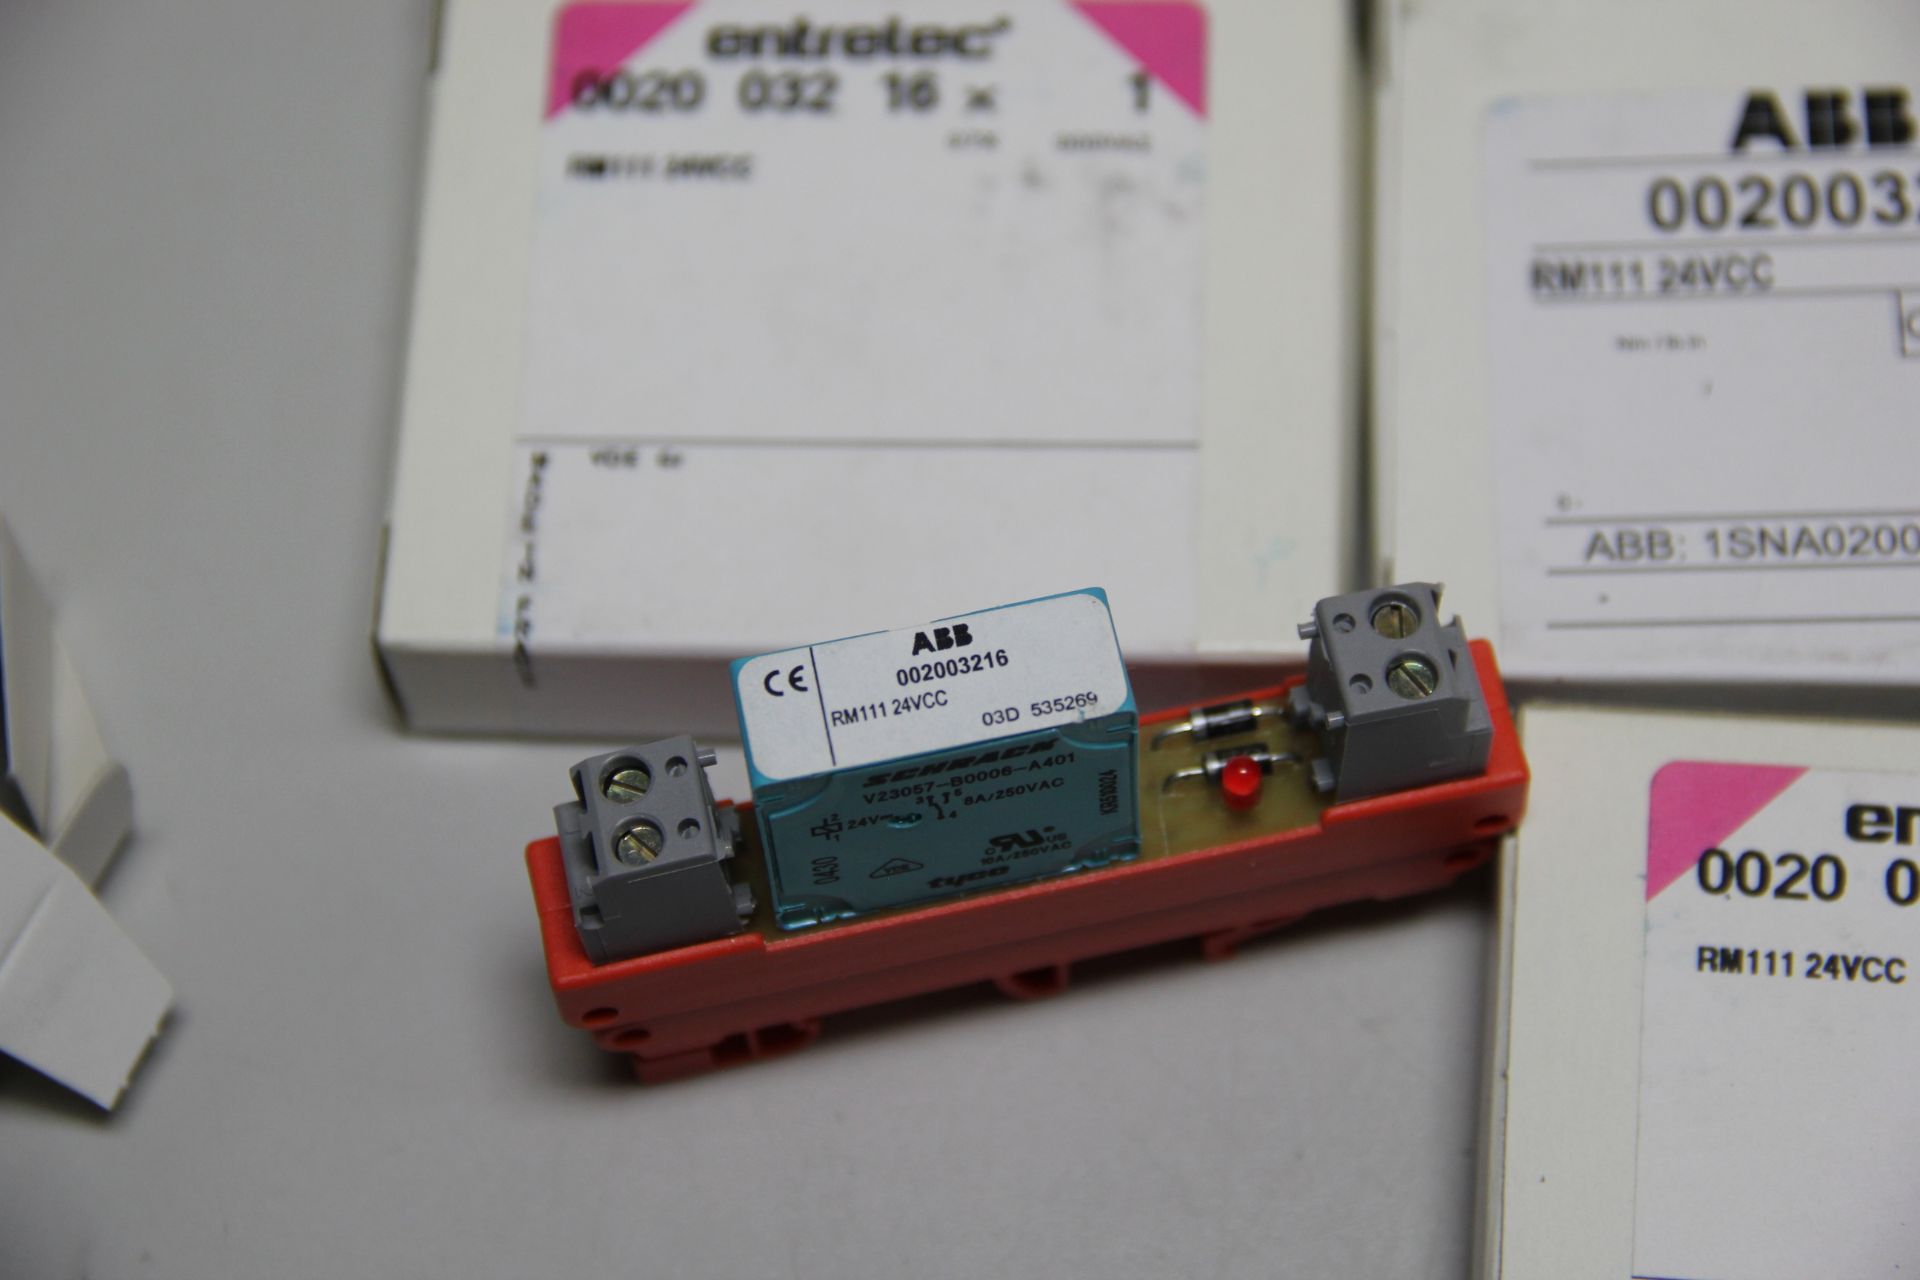 LOT OF NEW ABB ENTRELEC NON-LATCHING RELAY MODULES - Image 4 of 4